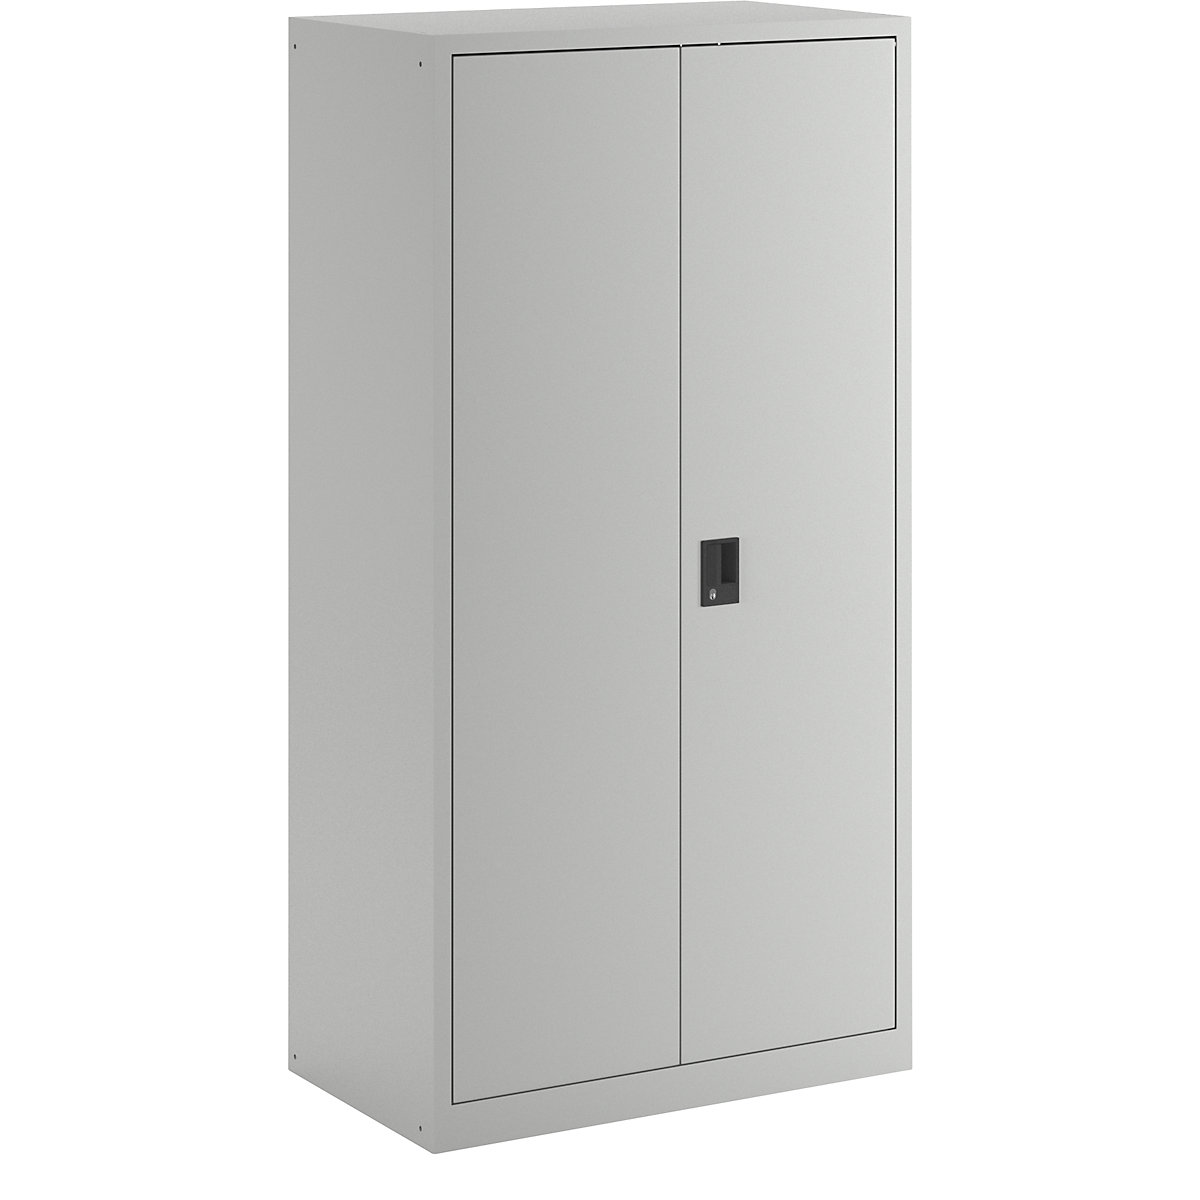 Battery charging cabinet – LISTA, 4 shelves, solid panel doors, 2 power strips at rear, grey-23